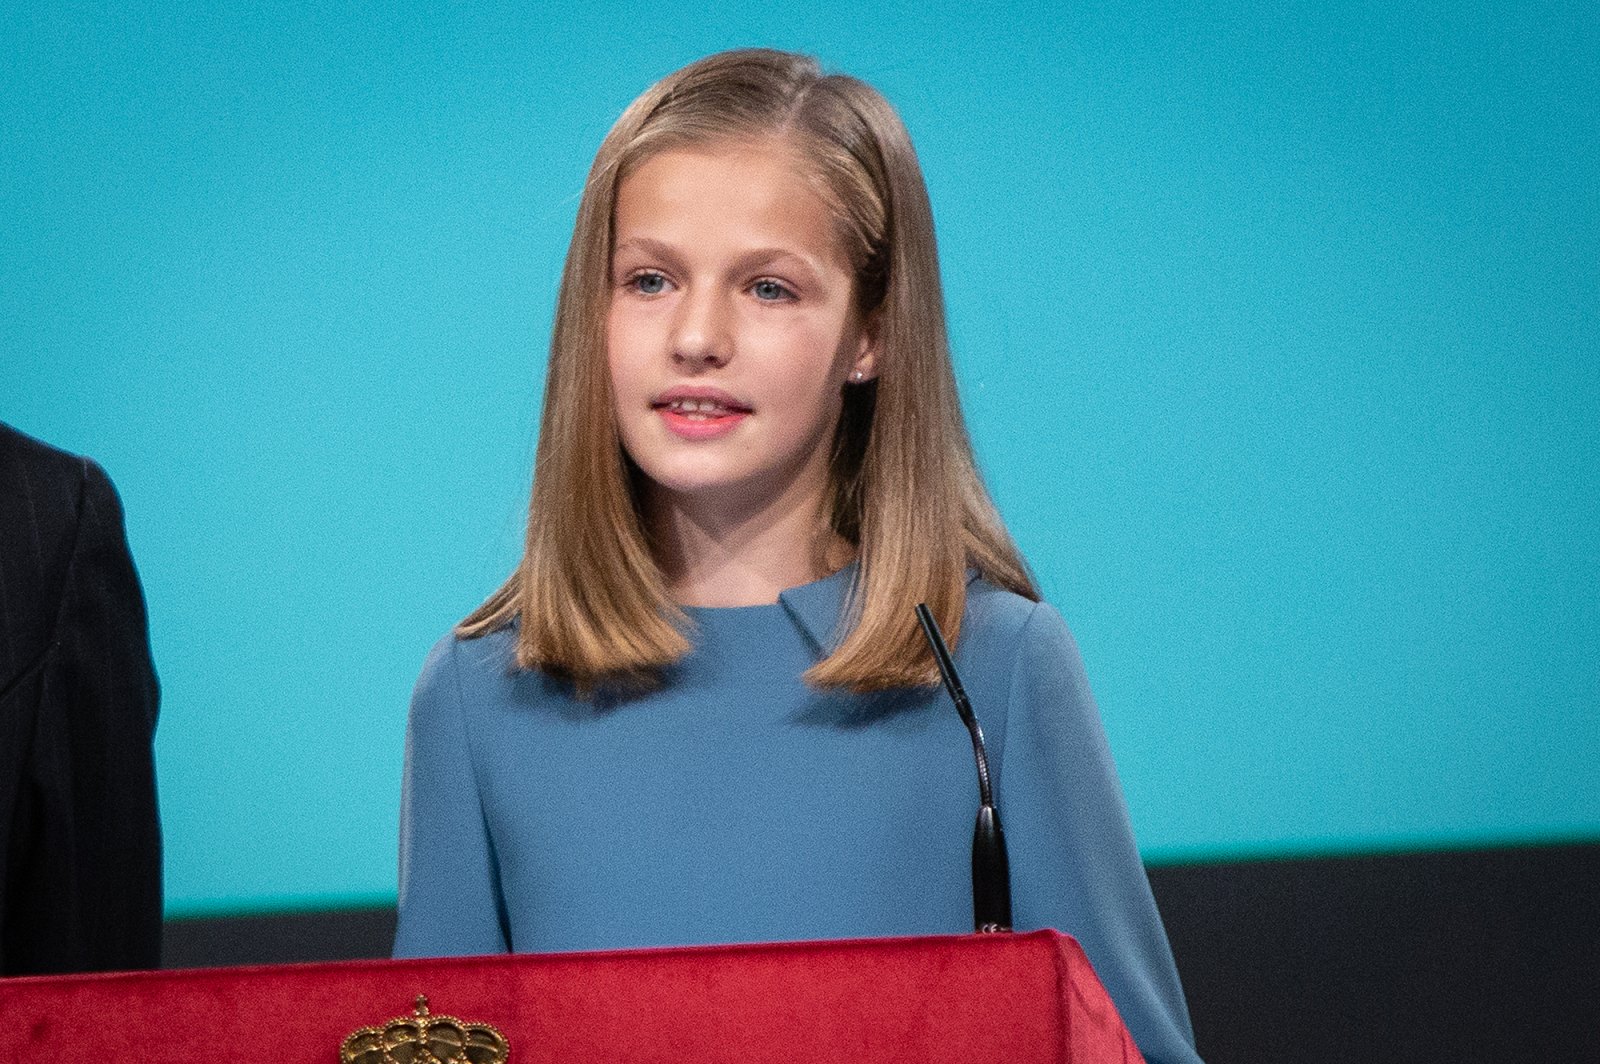 Princess Leonor of Spain, 13, Gives First Royal Speech UsWeekly